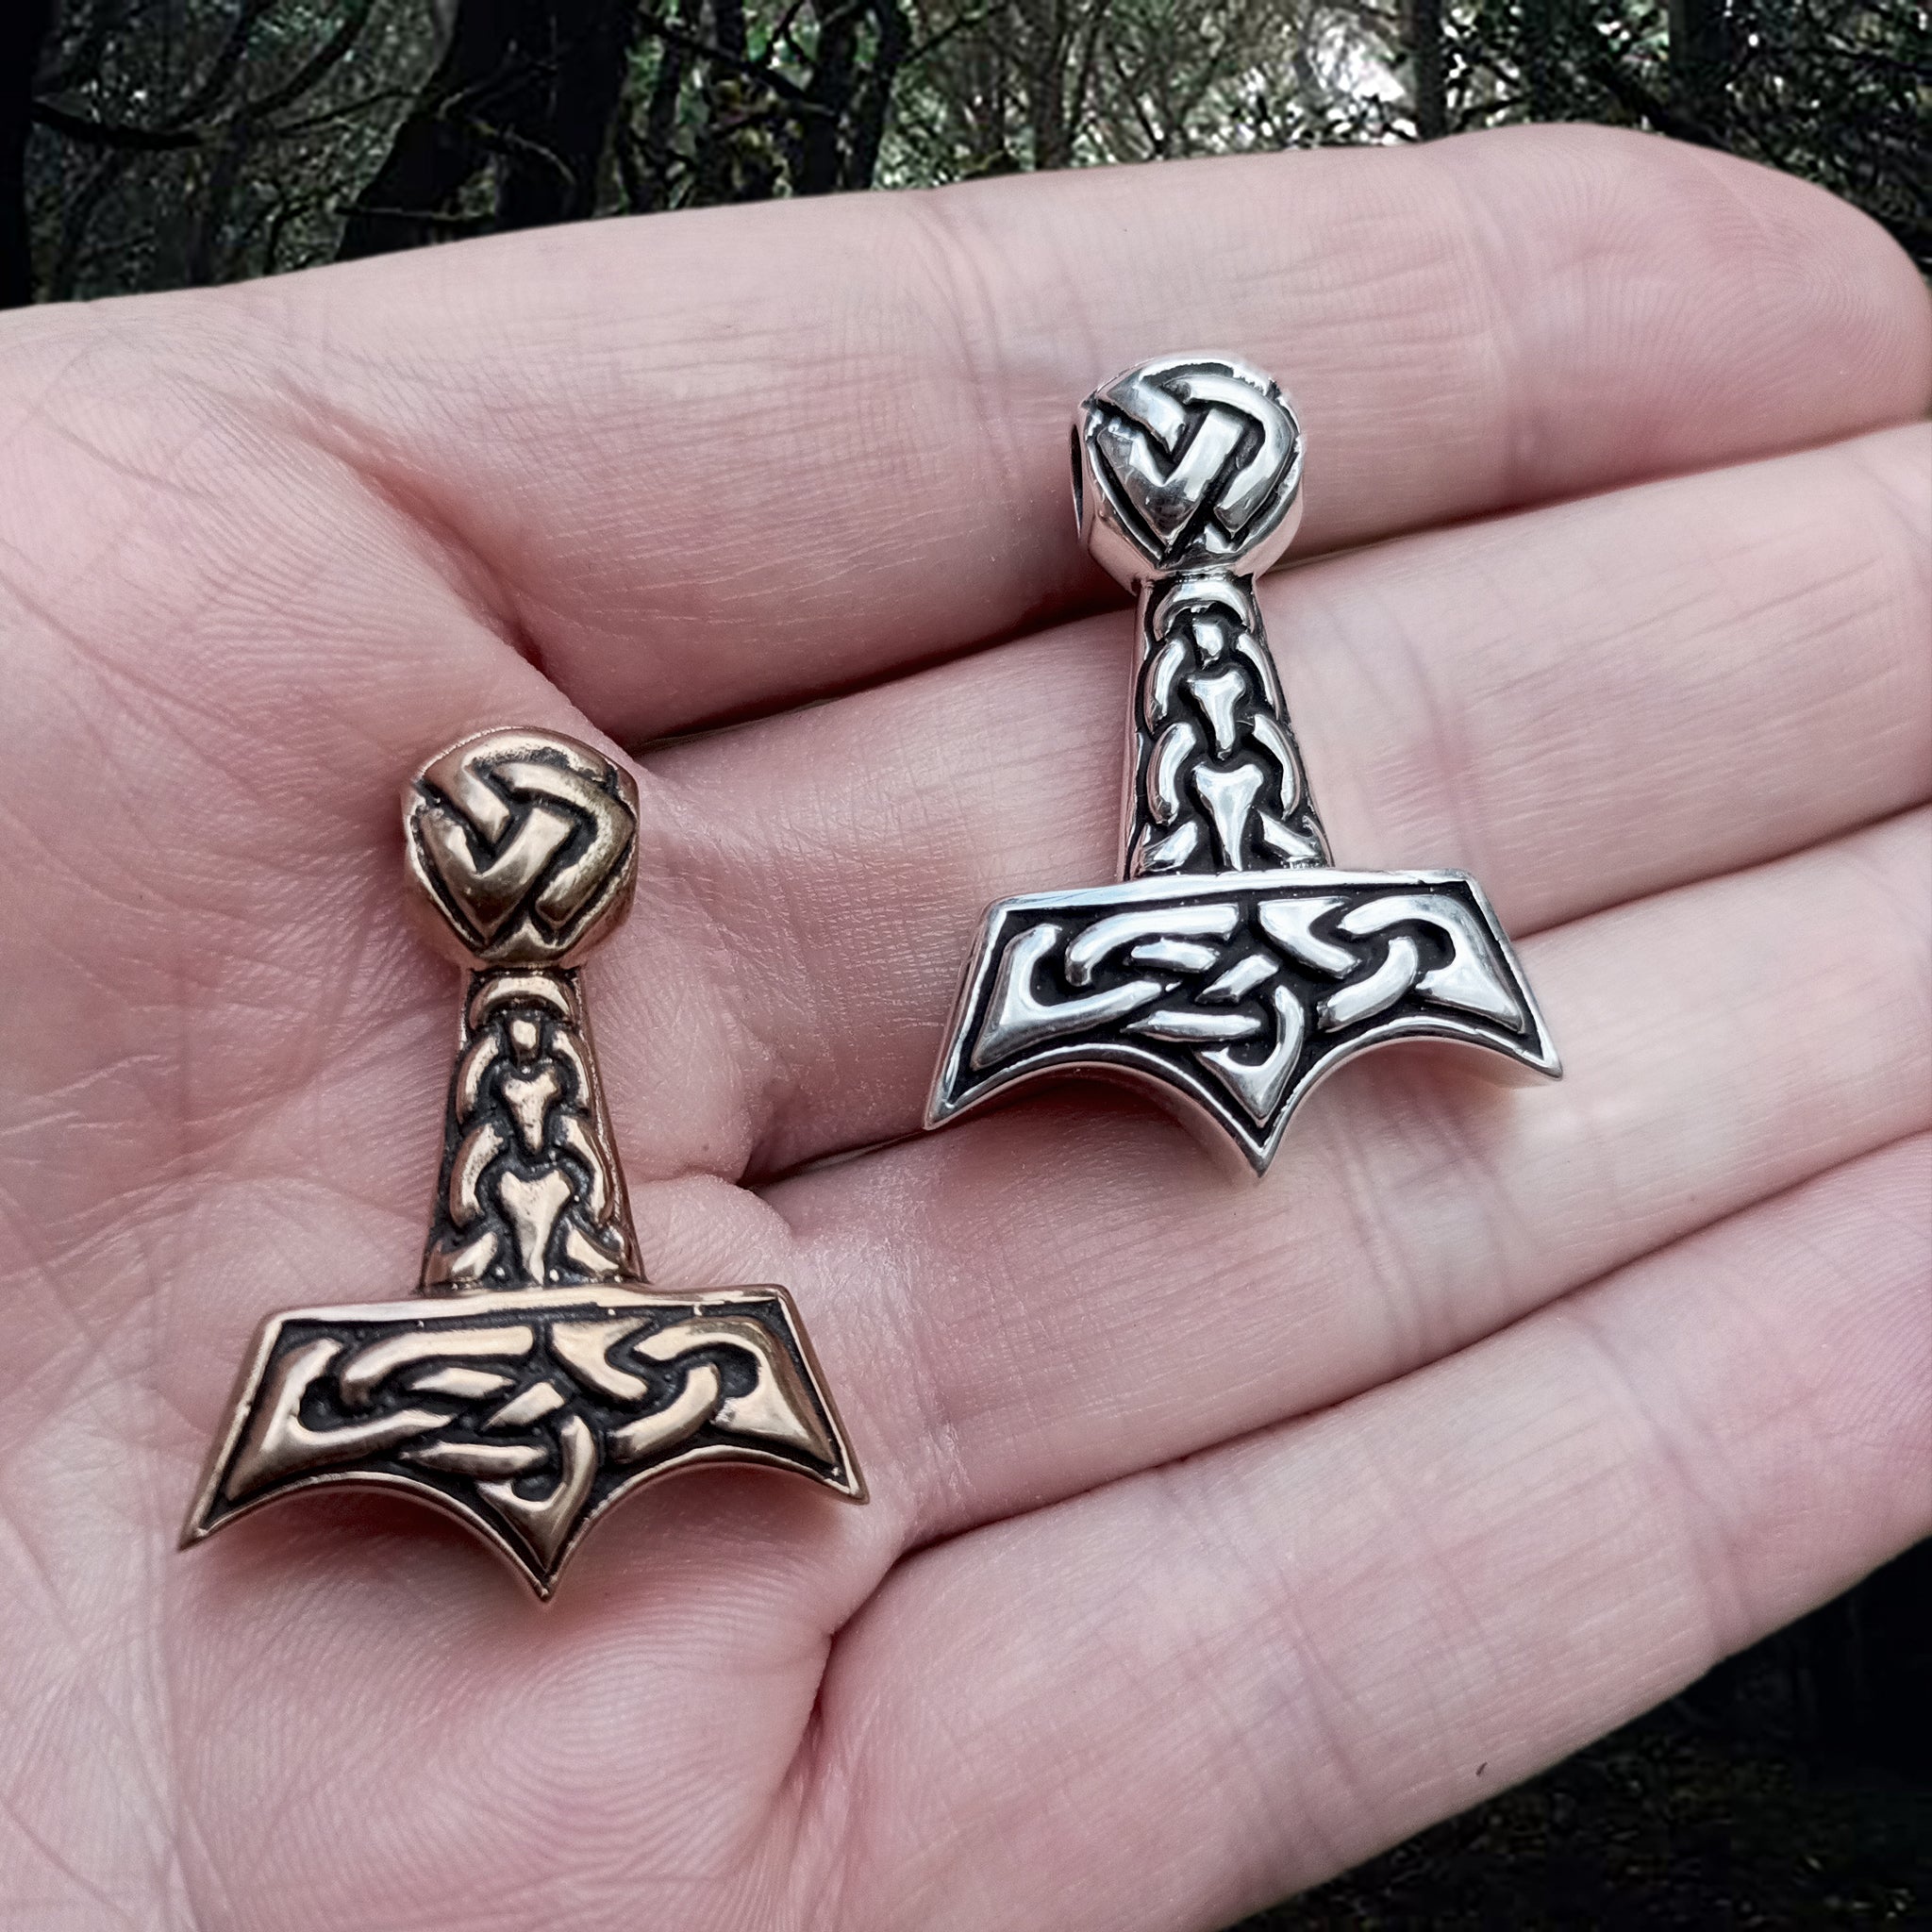 Knotwork Viking Thors Hammer Pendants in Bronze and Silver on Hand